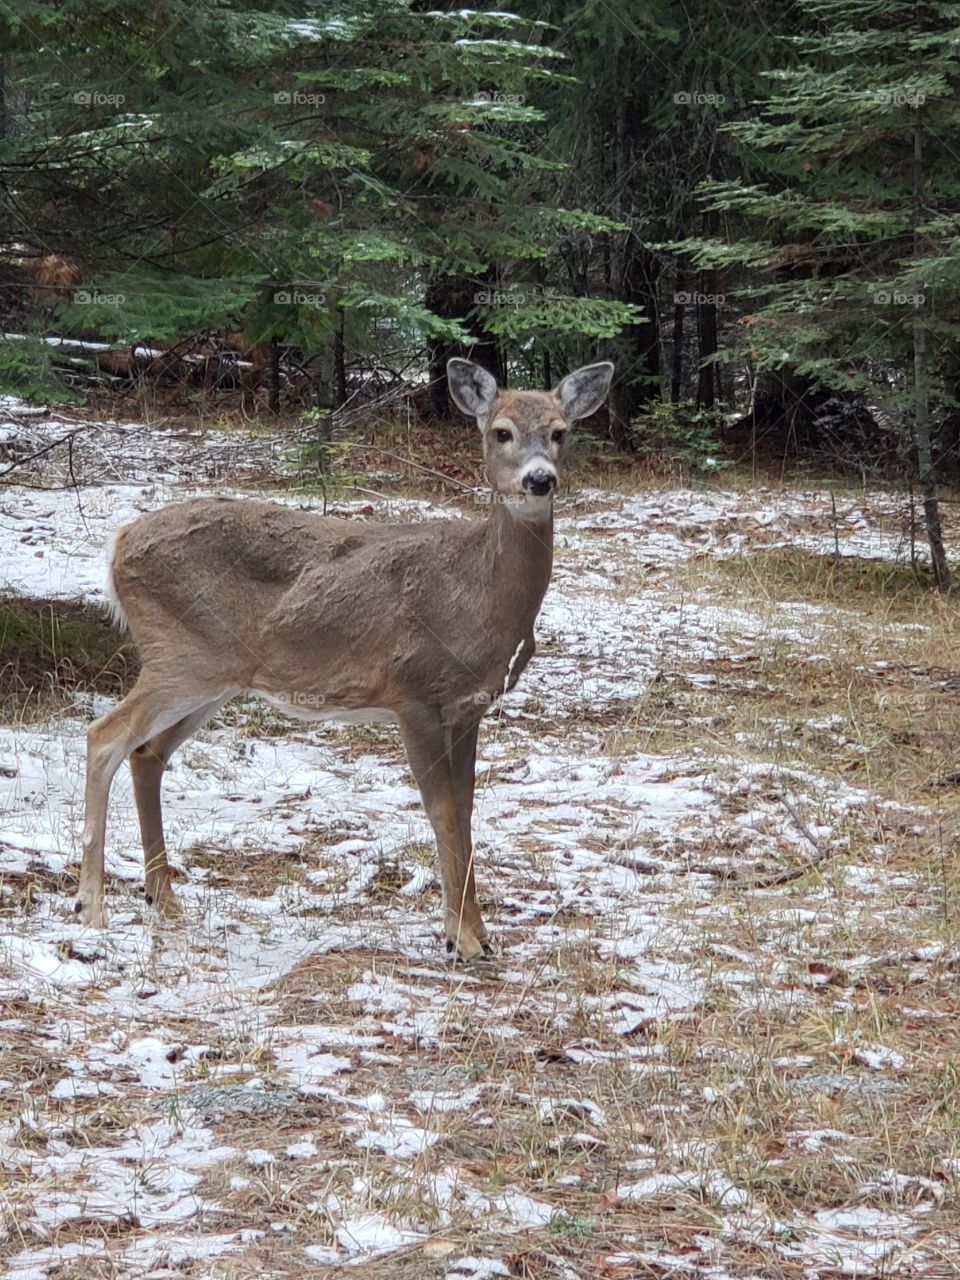 deer standing in forrest with snow on ground looking at camera